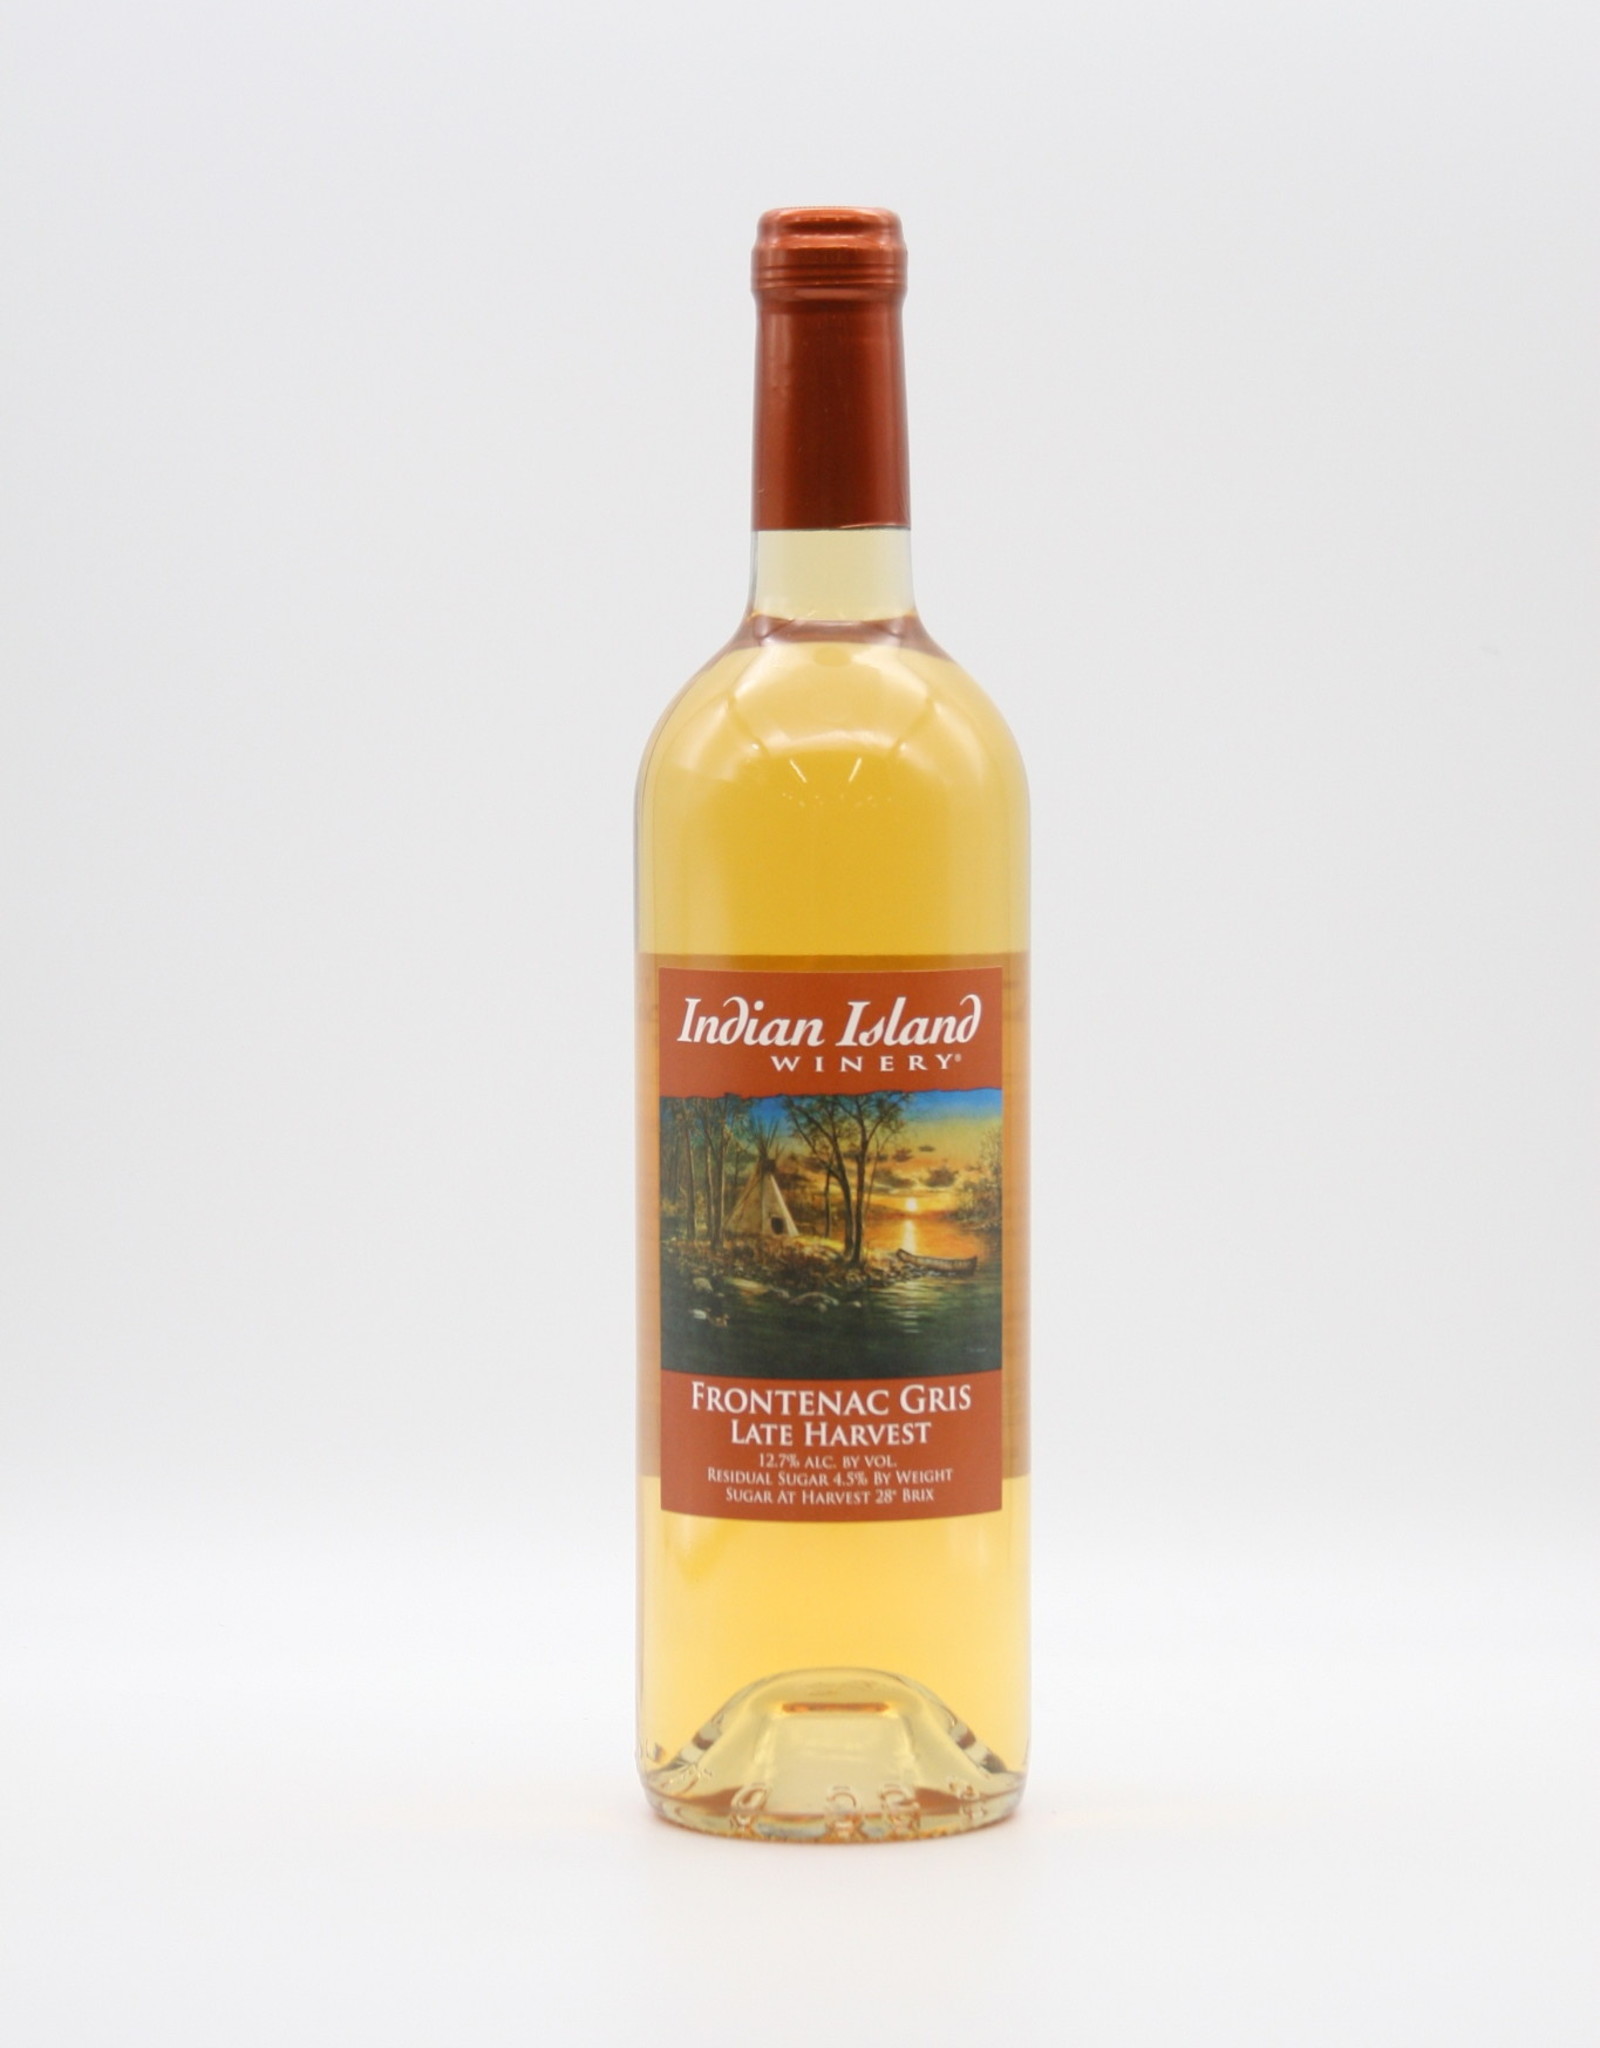 Indian Island Frontenac Gris Late Harvest